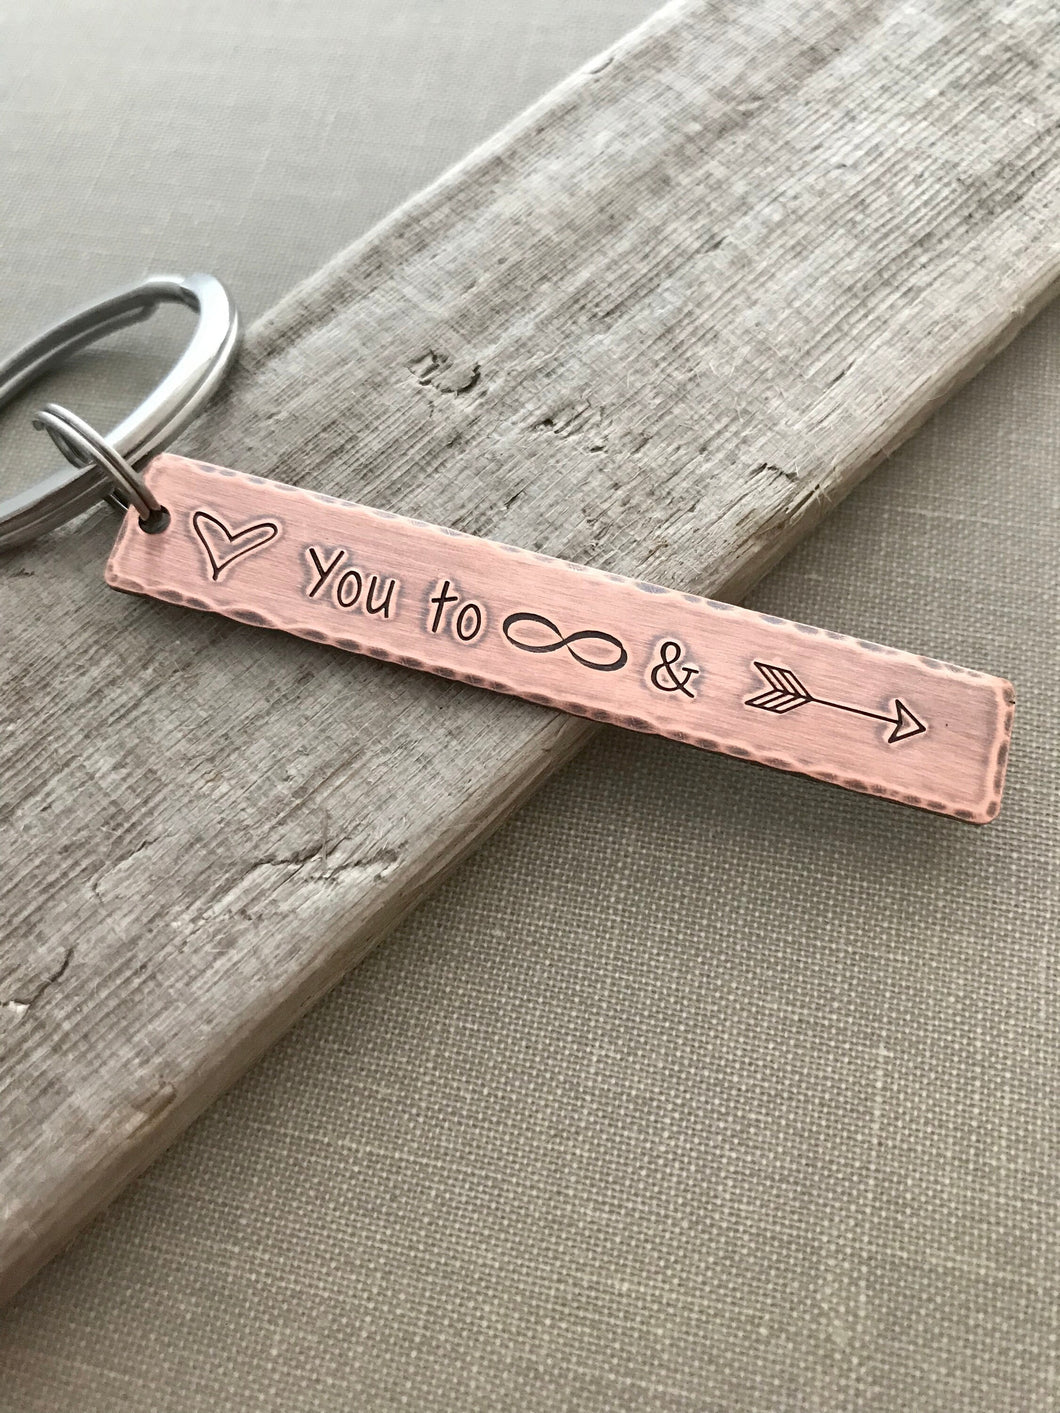 Love you to infinity and beyond keychain - Copper or silver aluminum - Hand Stamped Key chain - Gift idea for him -  Antiqued rustic style